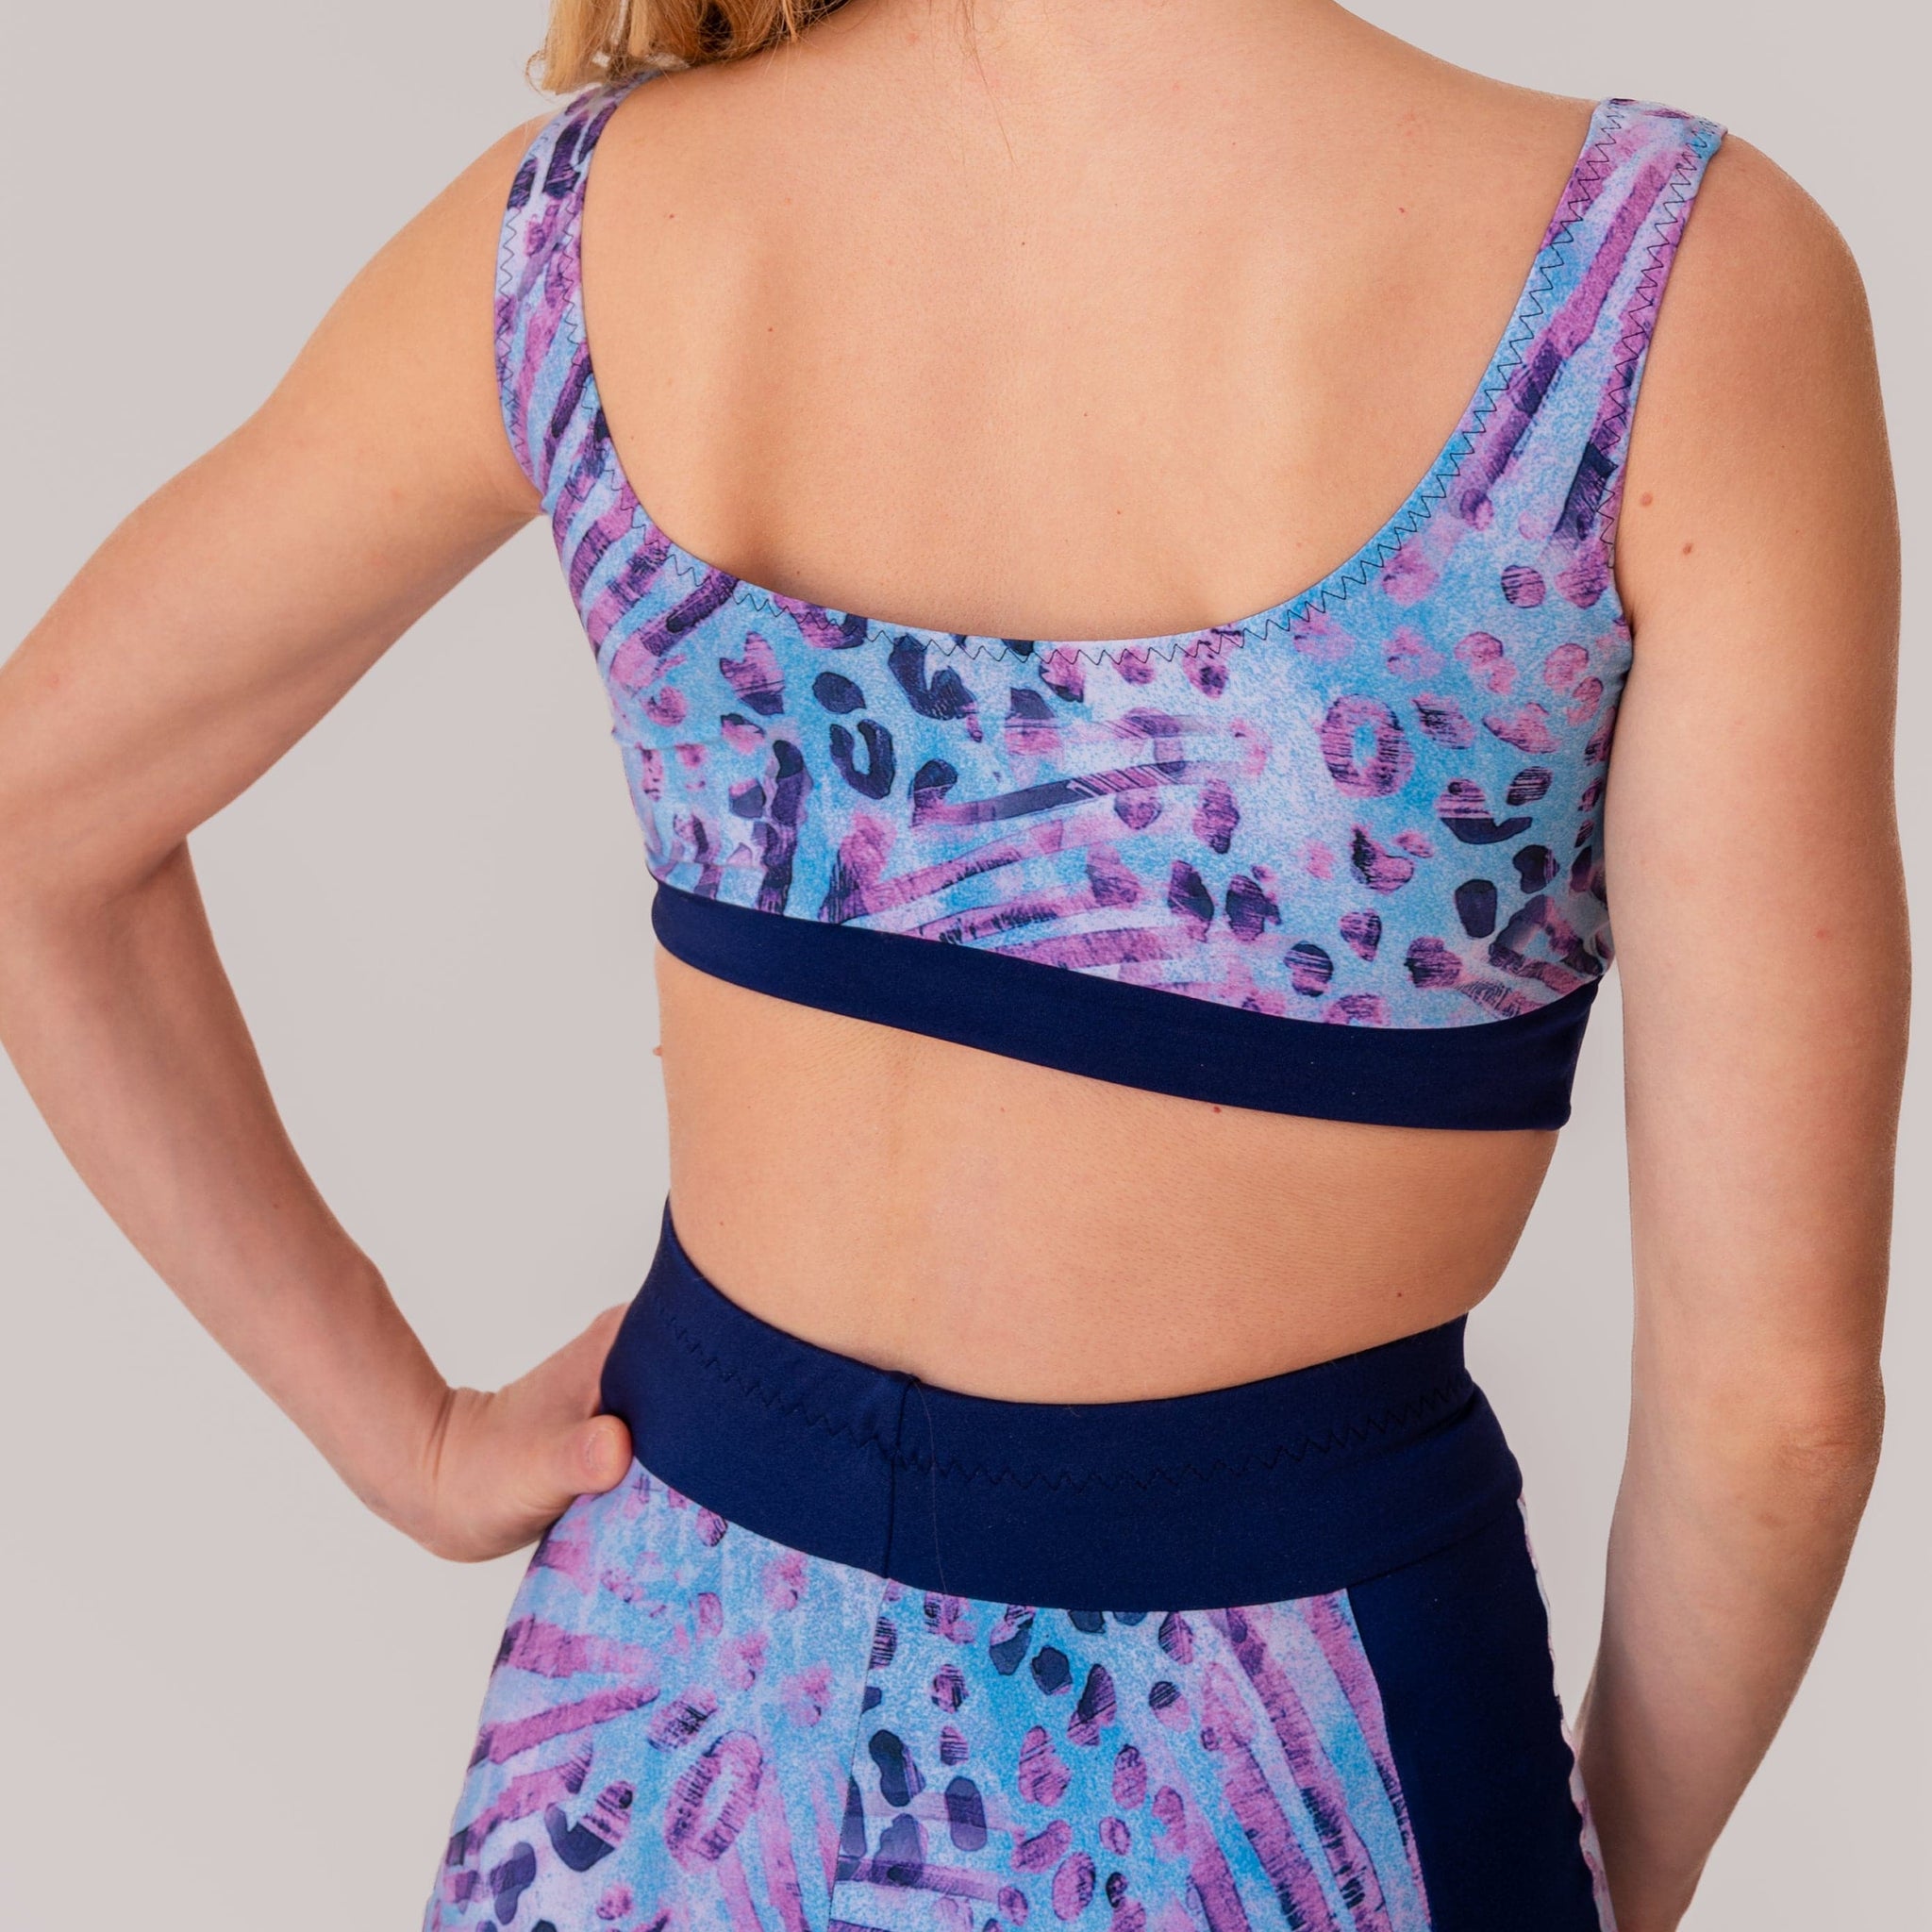 Women's Patterned Blue Bralette for Fitness and Yoga Workout by LENA Activewear